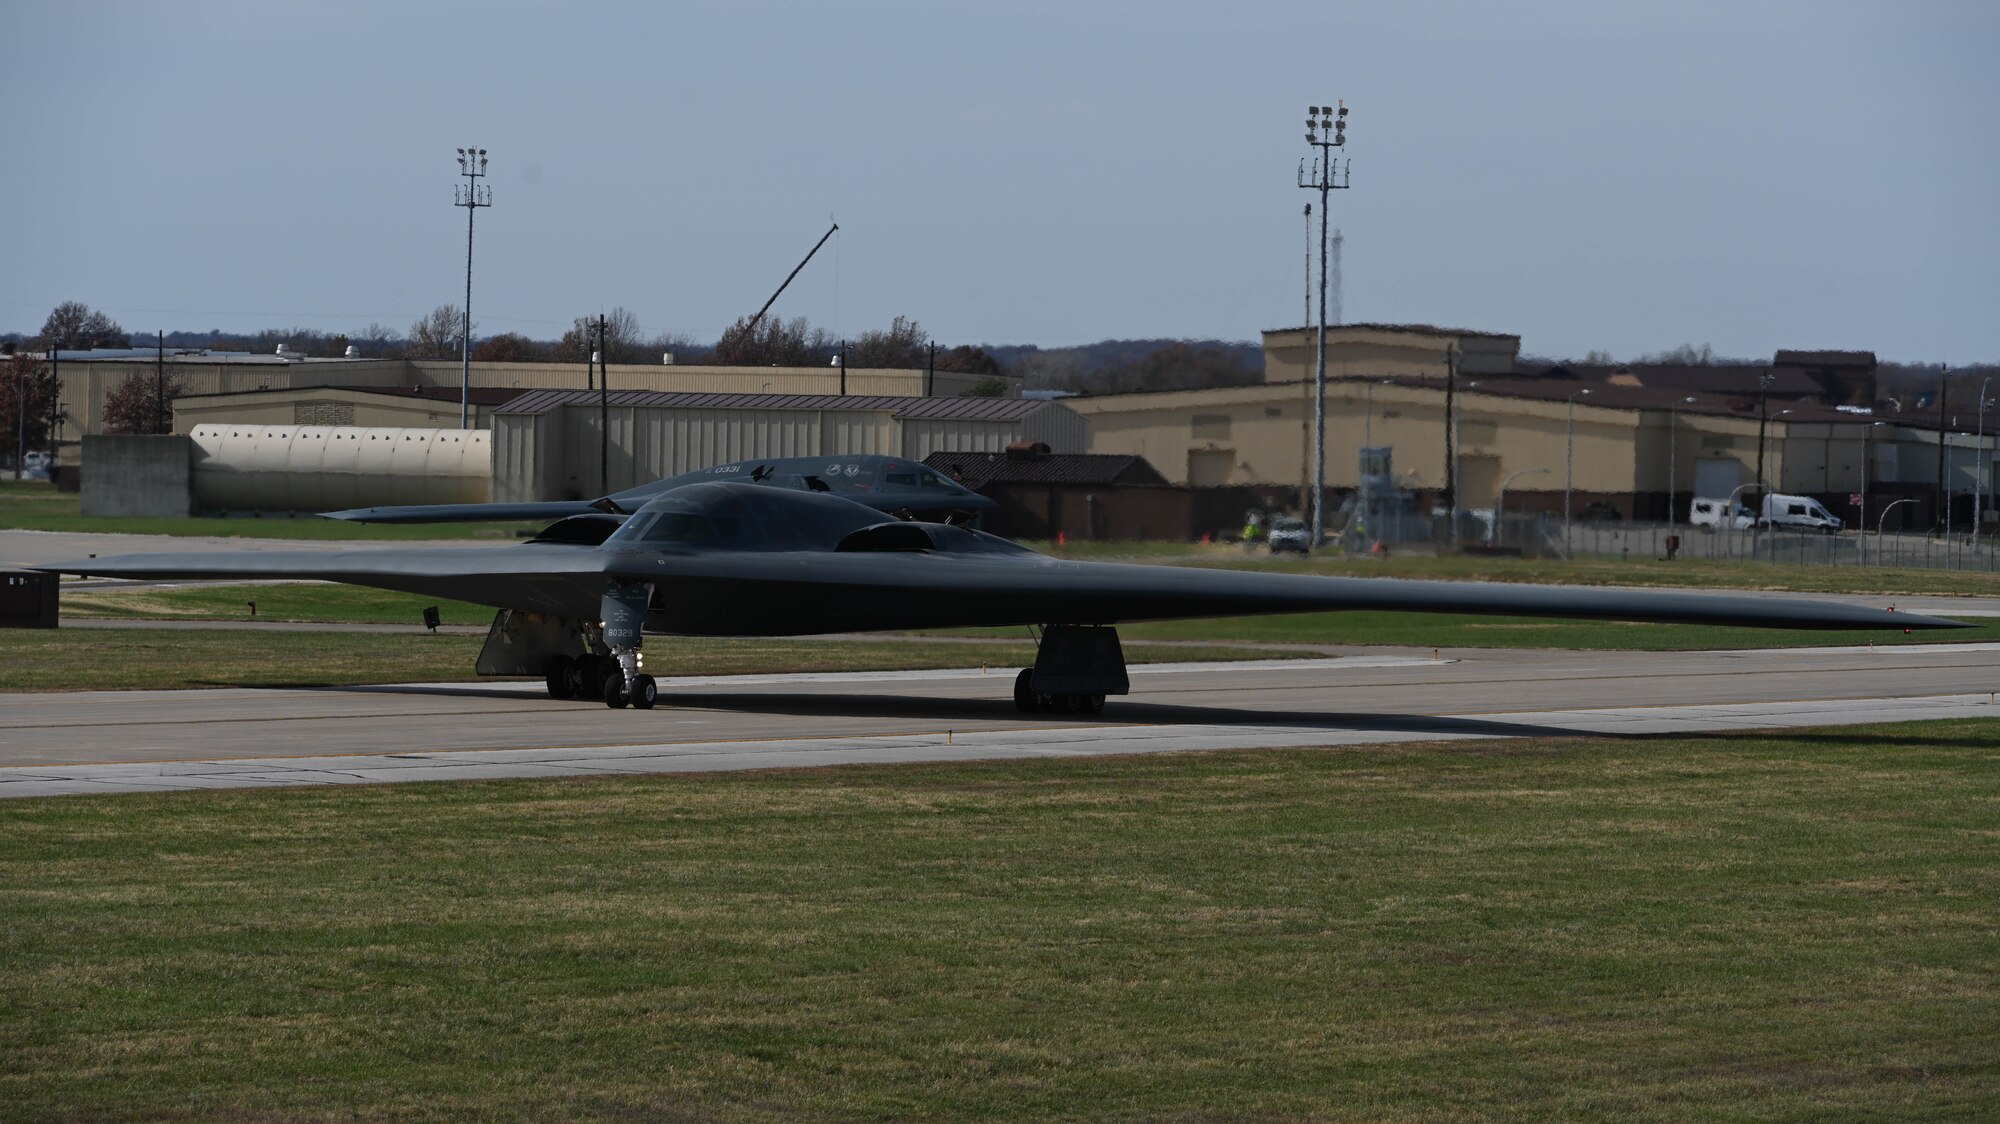 A B-2 Spirit stealth bombers assigned to the 509th Bomb Wing taxis to the runway at Whiteman Air Force Base, Missouri November 7, 2022. The B-2 participated in Spirit Vigilance, a routine training exercise designed to test the wing's readiness to conduct deterrence and combat operations. (U.S. Air Force photo by Airman 1st Class Hailey Farrell)